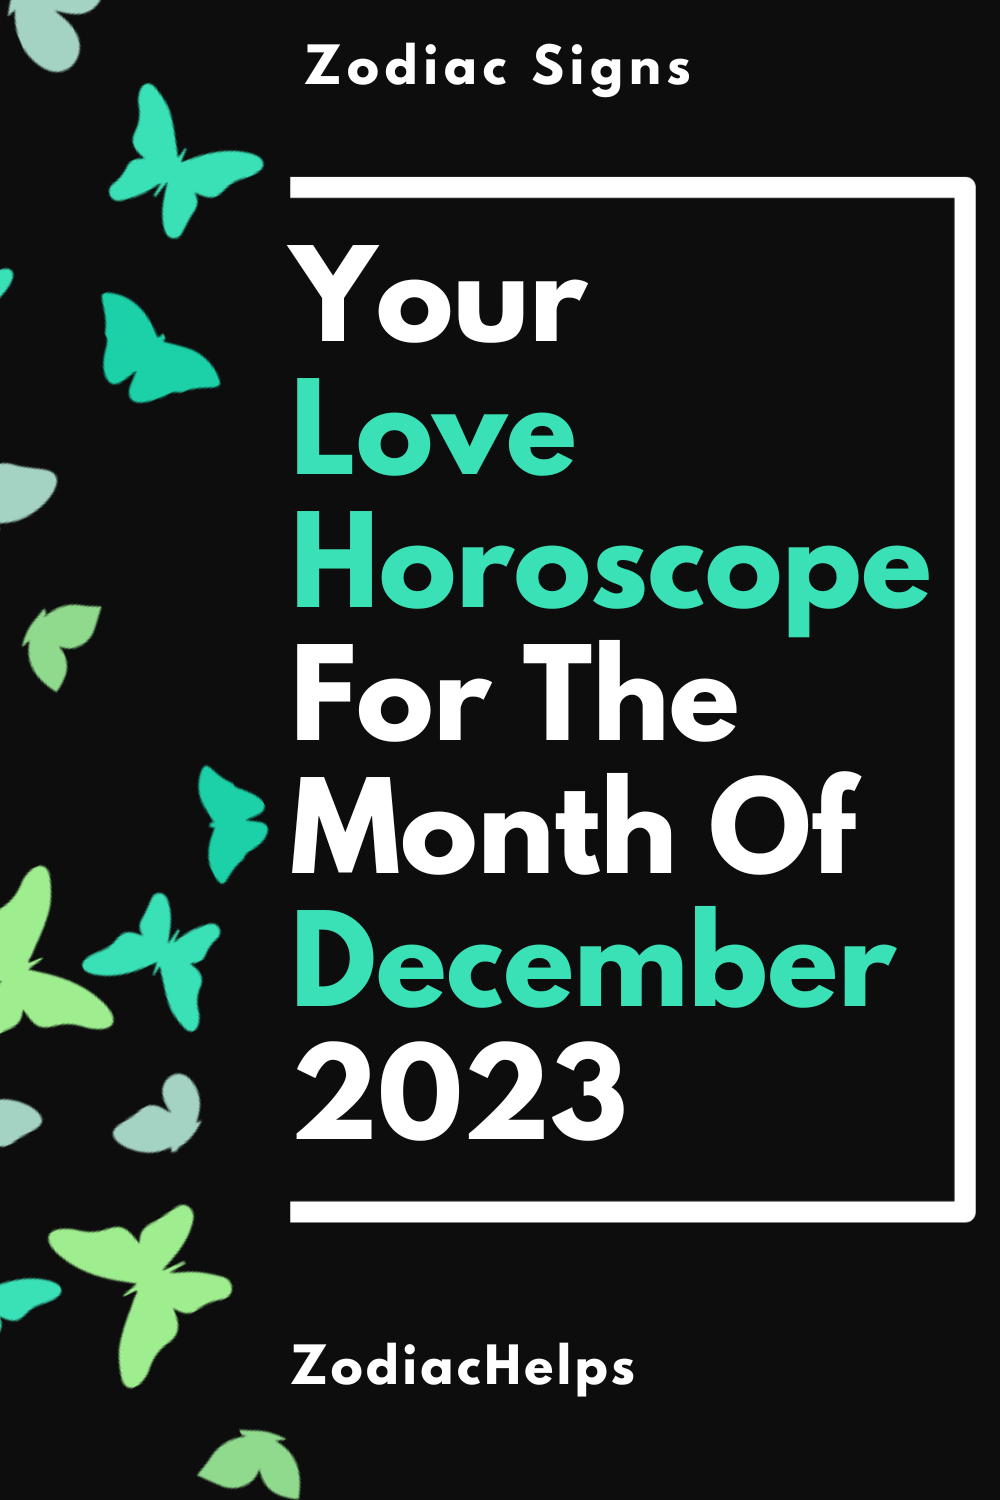 Your Love Horoscope For The Month Of December 2023